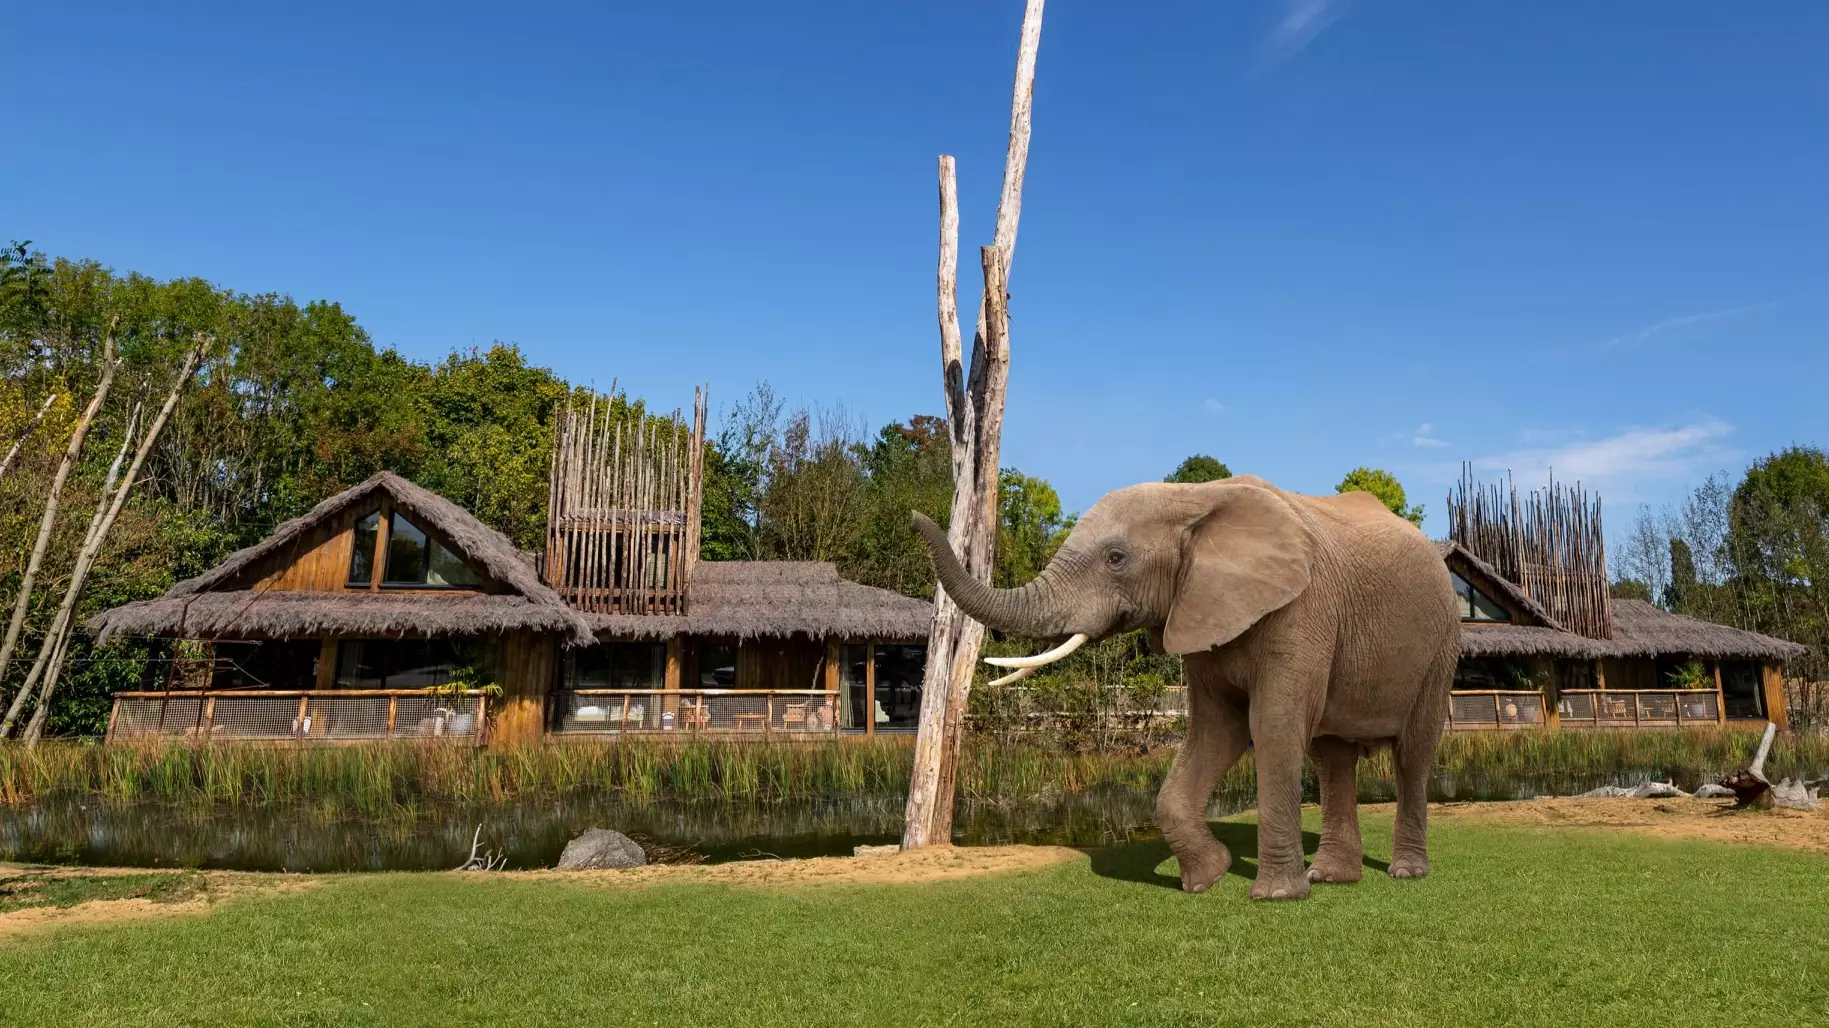 You Can Soon Stay In UK Safari Lodges And See Elephants From Your Room